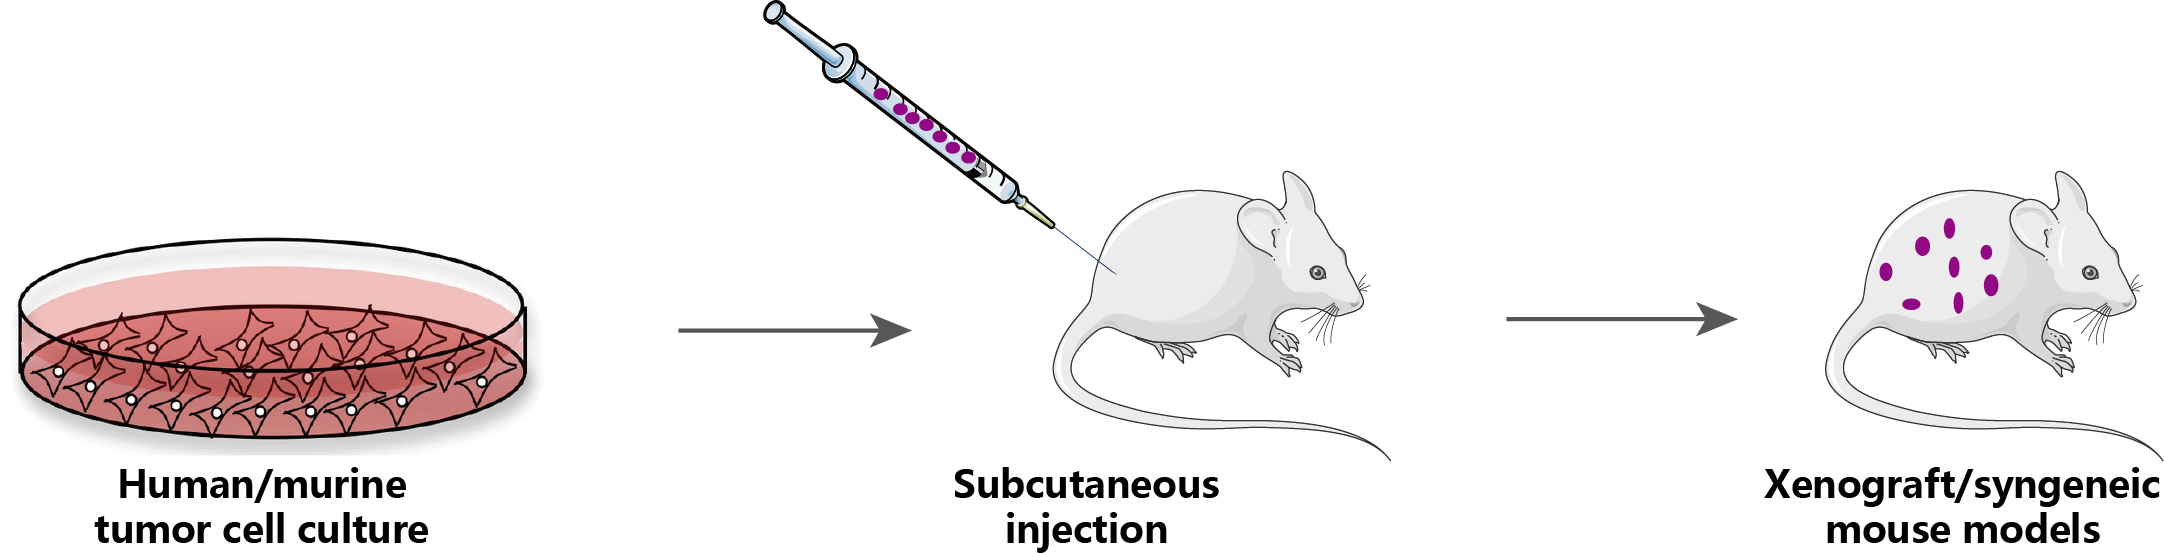 Schematic illustration of cell-based xenograft/syngeneic mouse models